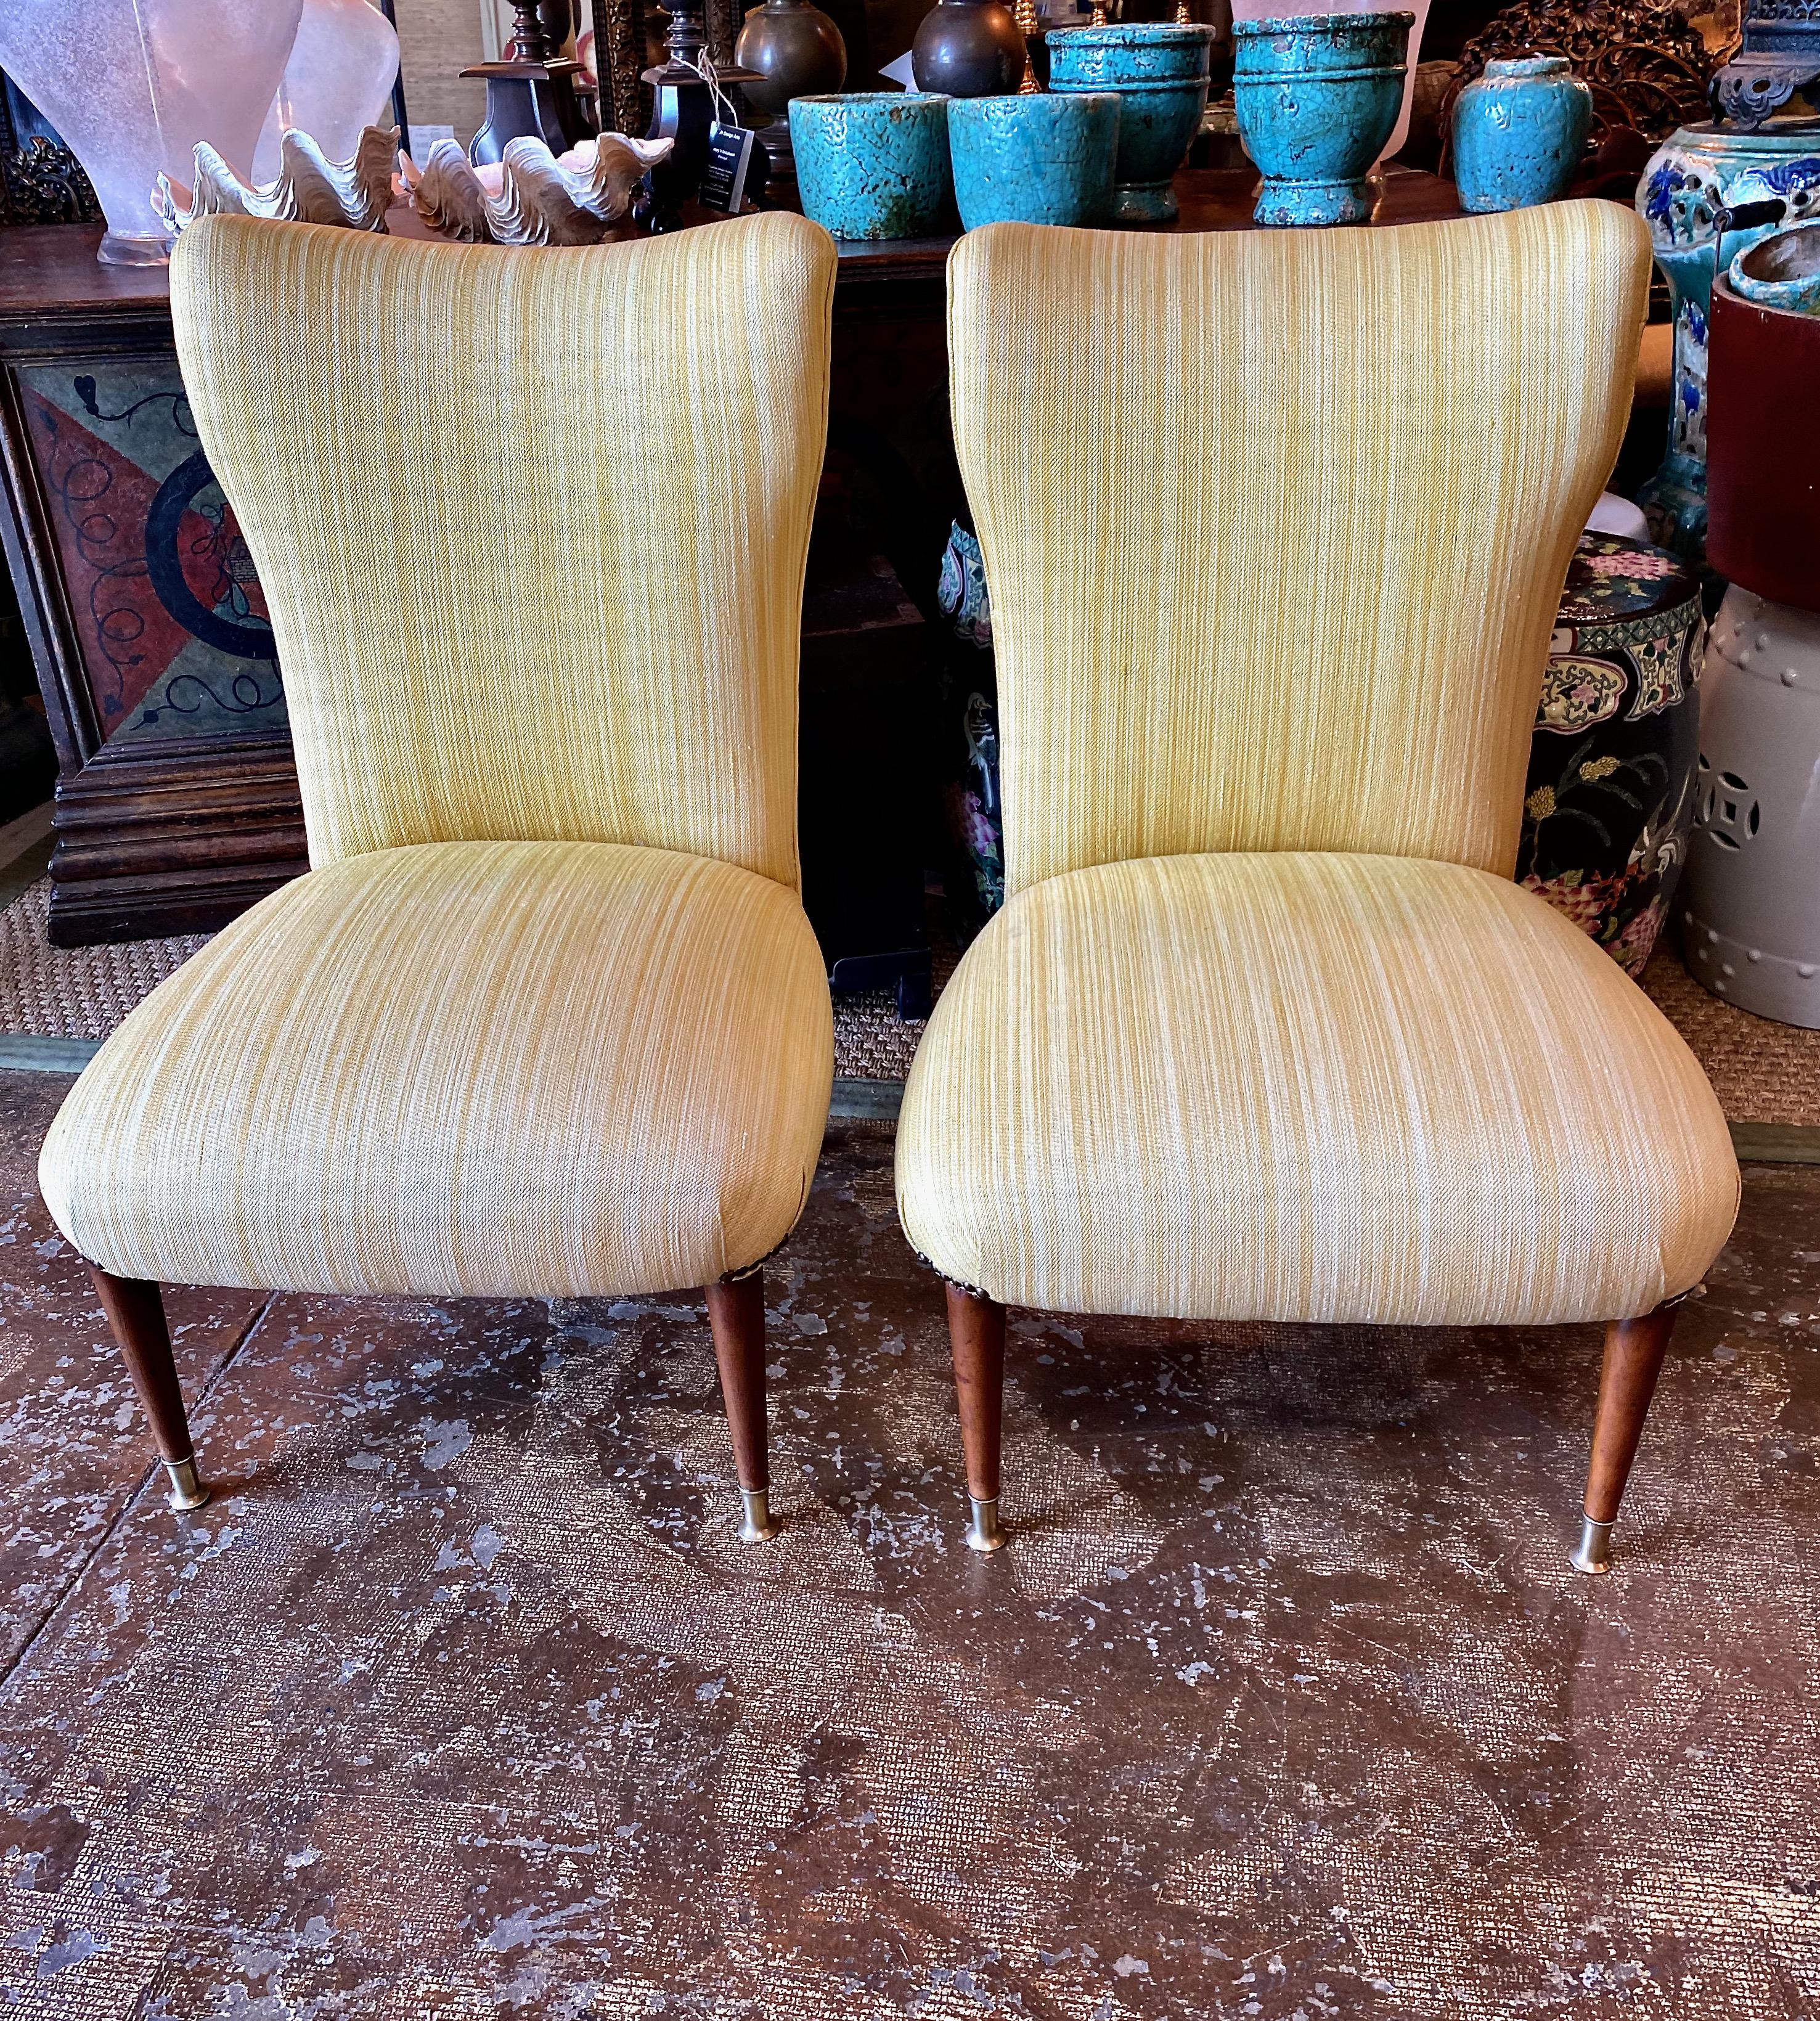 These mid-20th century Italian slipper chairs have all of the marks of Paolo Buffa design aesthetics--they are upholstered in a strie linen fabric which adds a little more pop to the already eye-catching chairs. These slipper or chauffeuse chairs